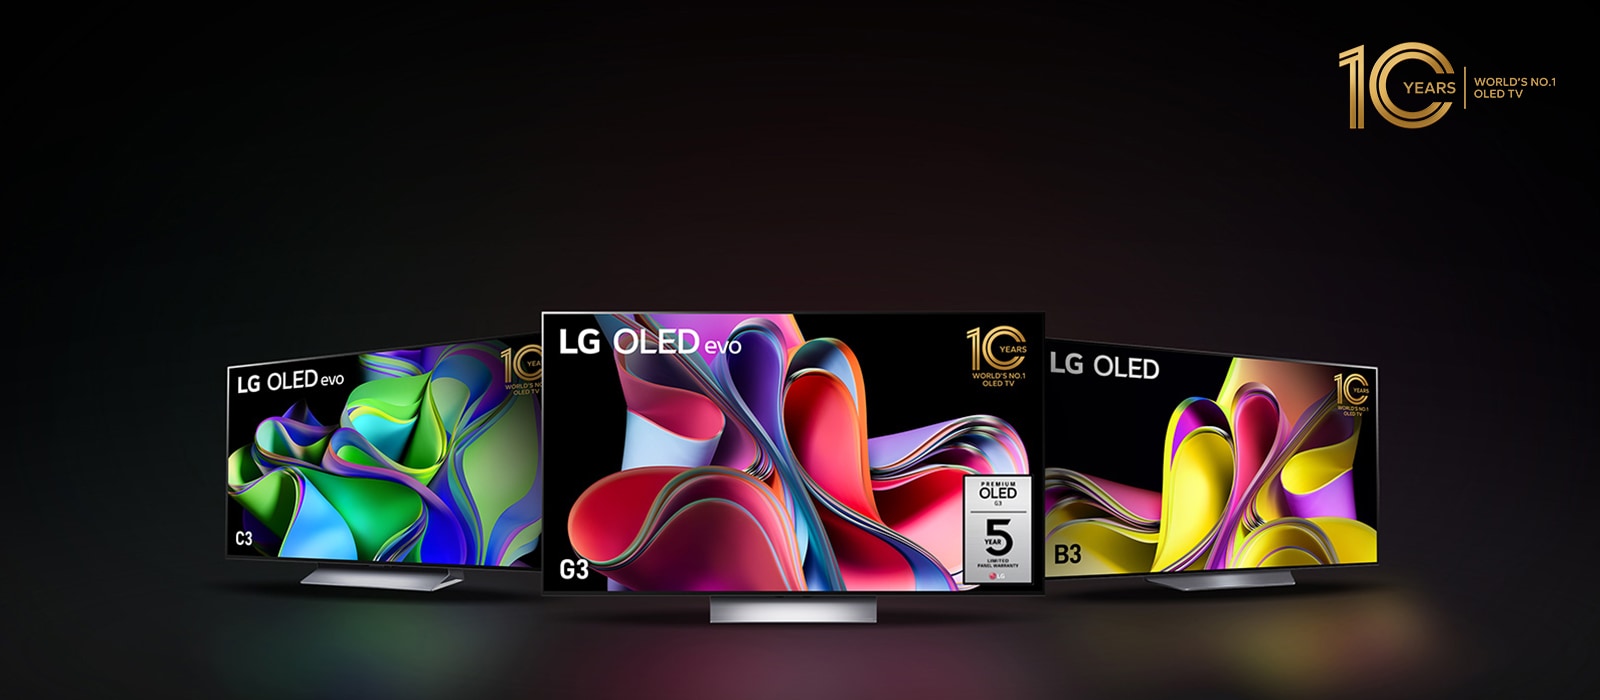 See which LG OLED TV is right for you1